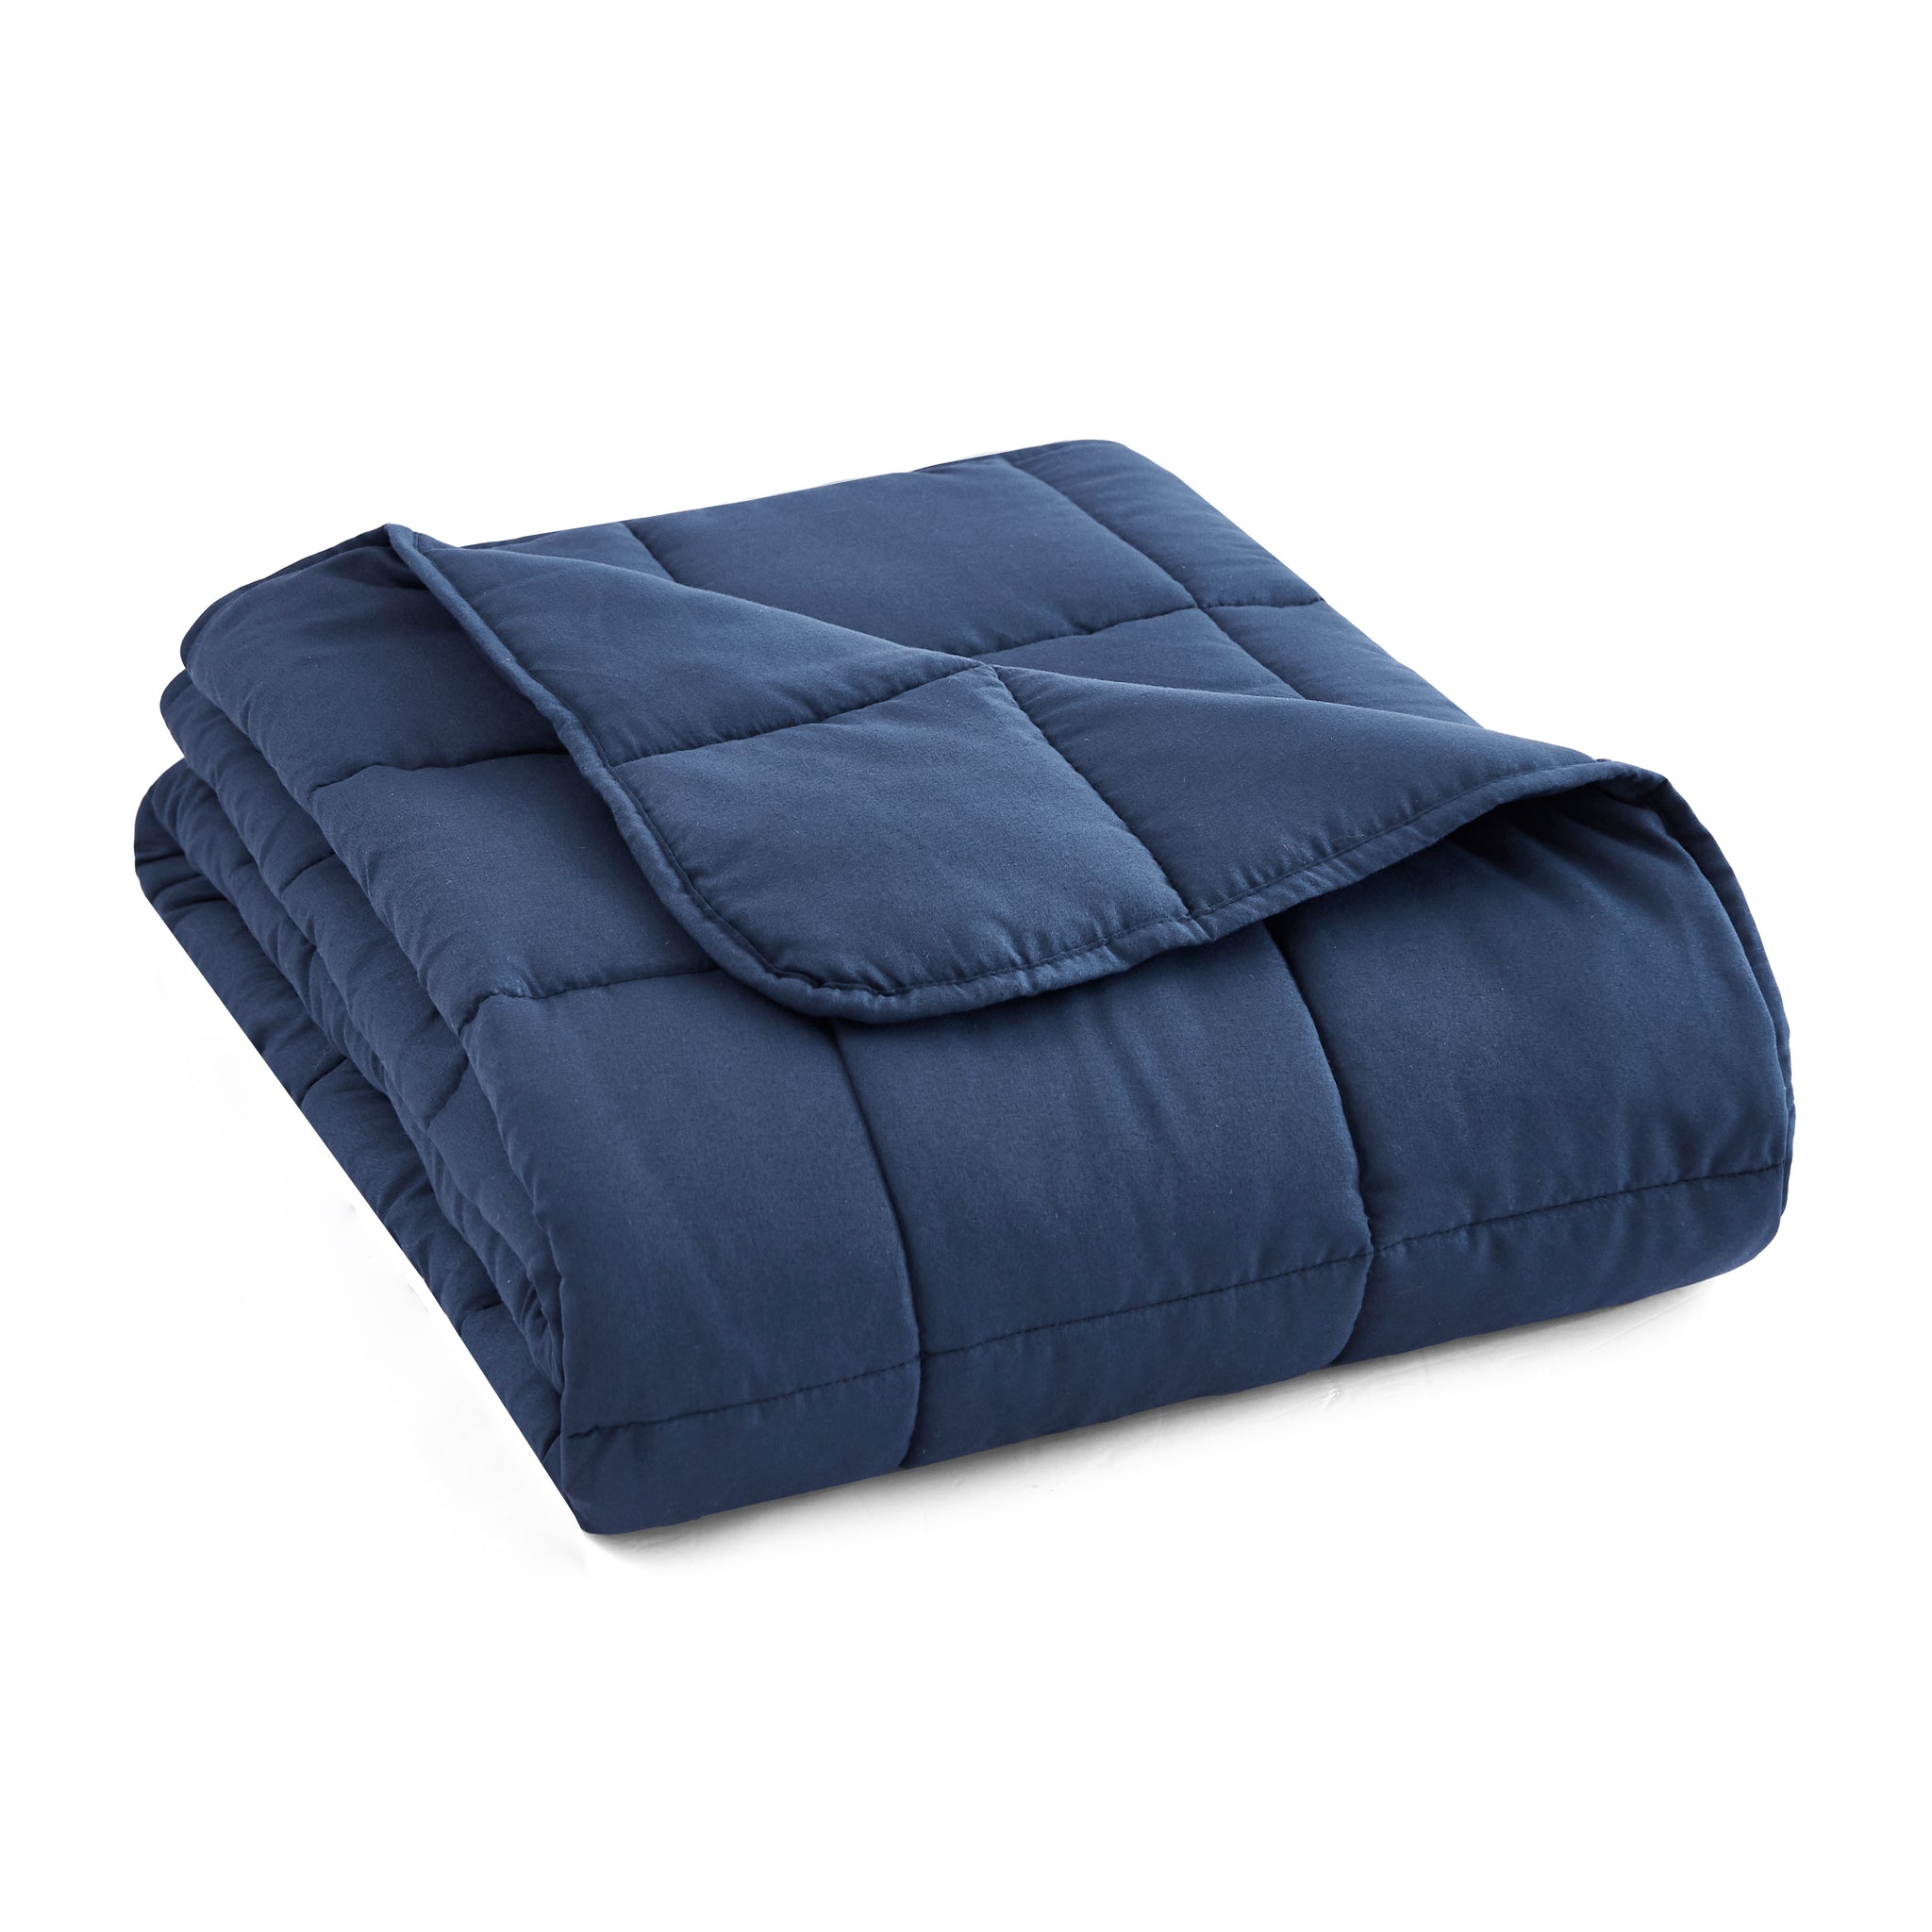 Microfiber Weighted Blanket 12 lb Grey